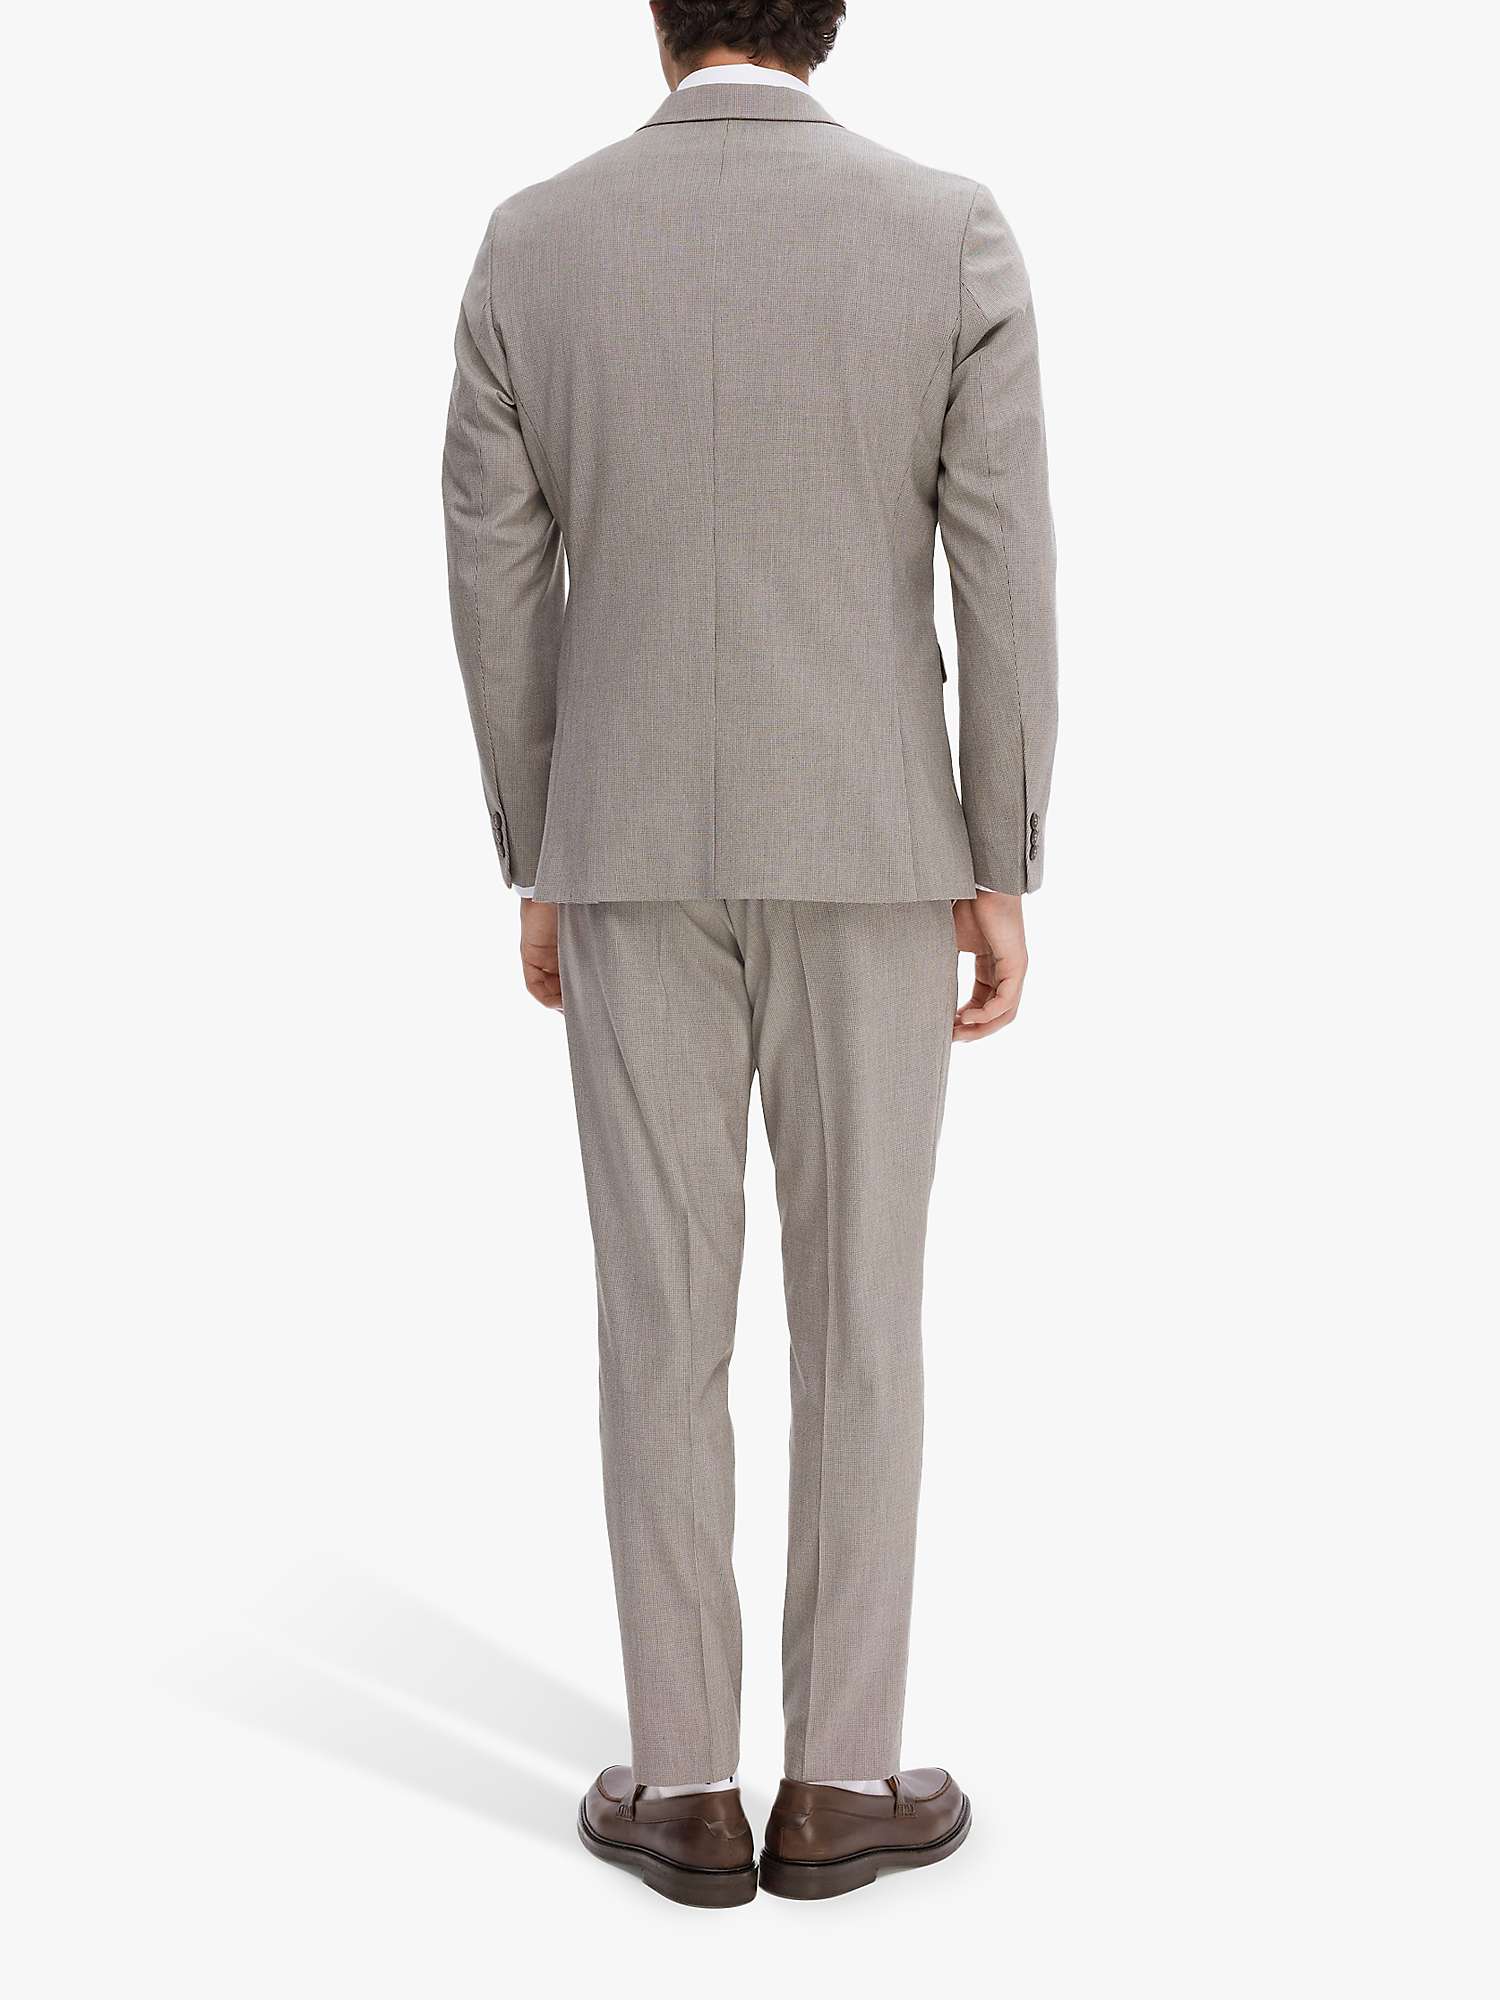 Buy SELECTED HOMME Tailored Fit Nordic Heritage Suit Jacket, Light Brown Online at johnlewis.com